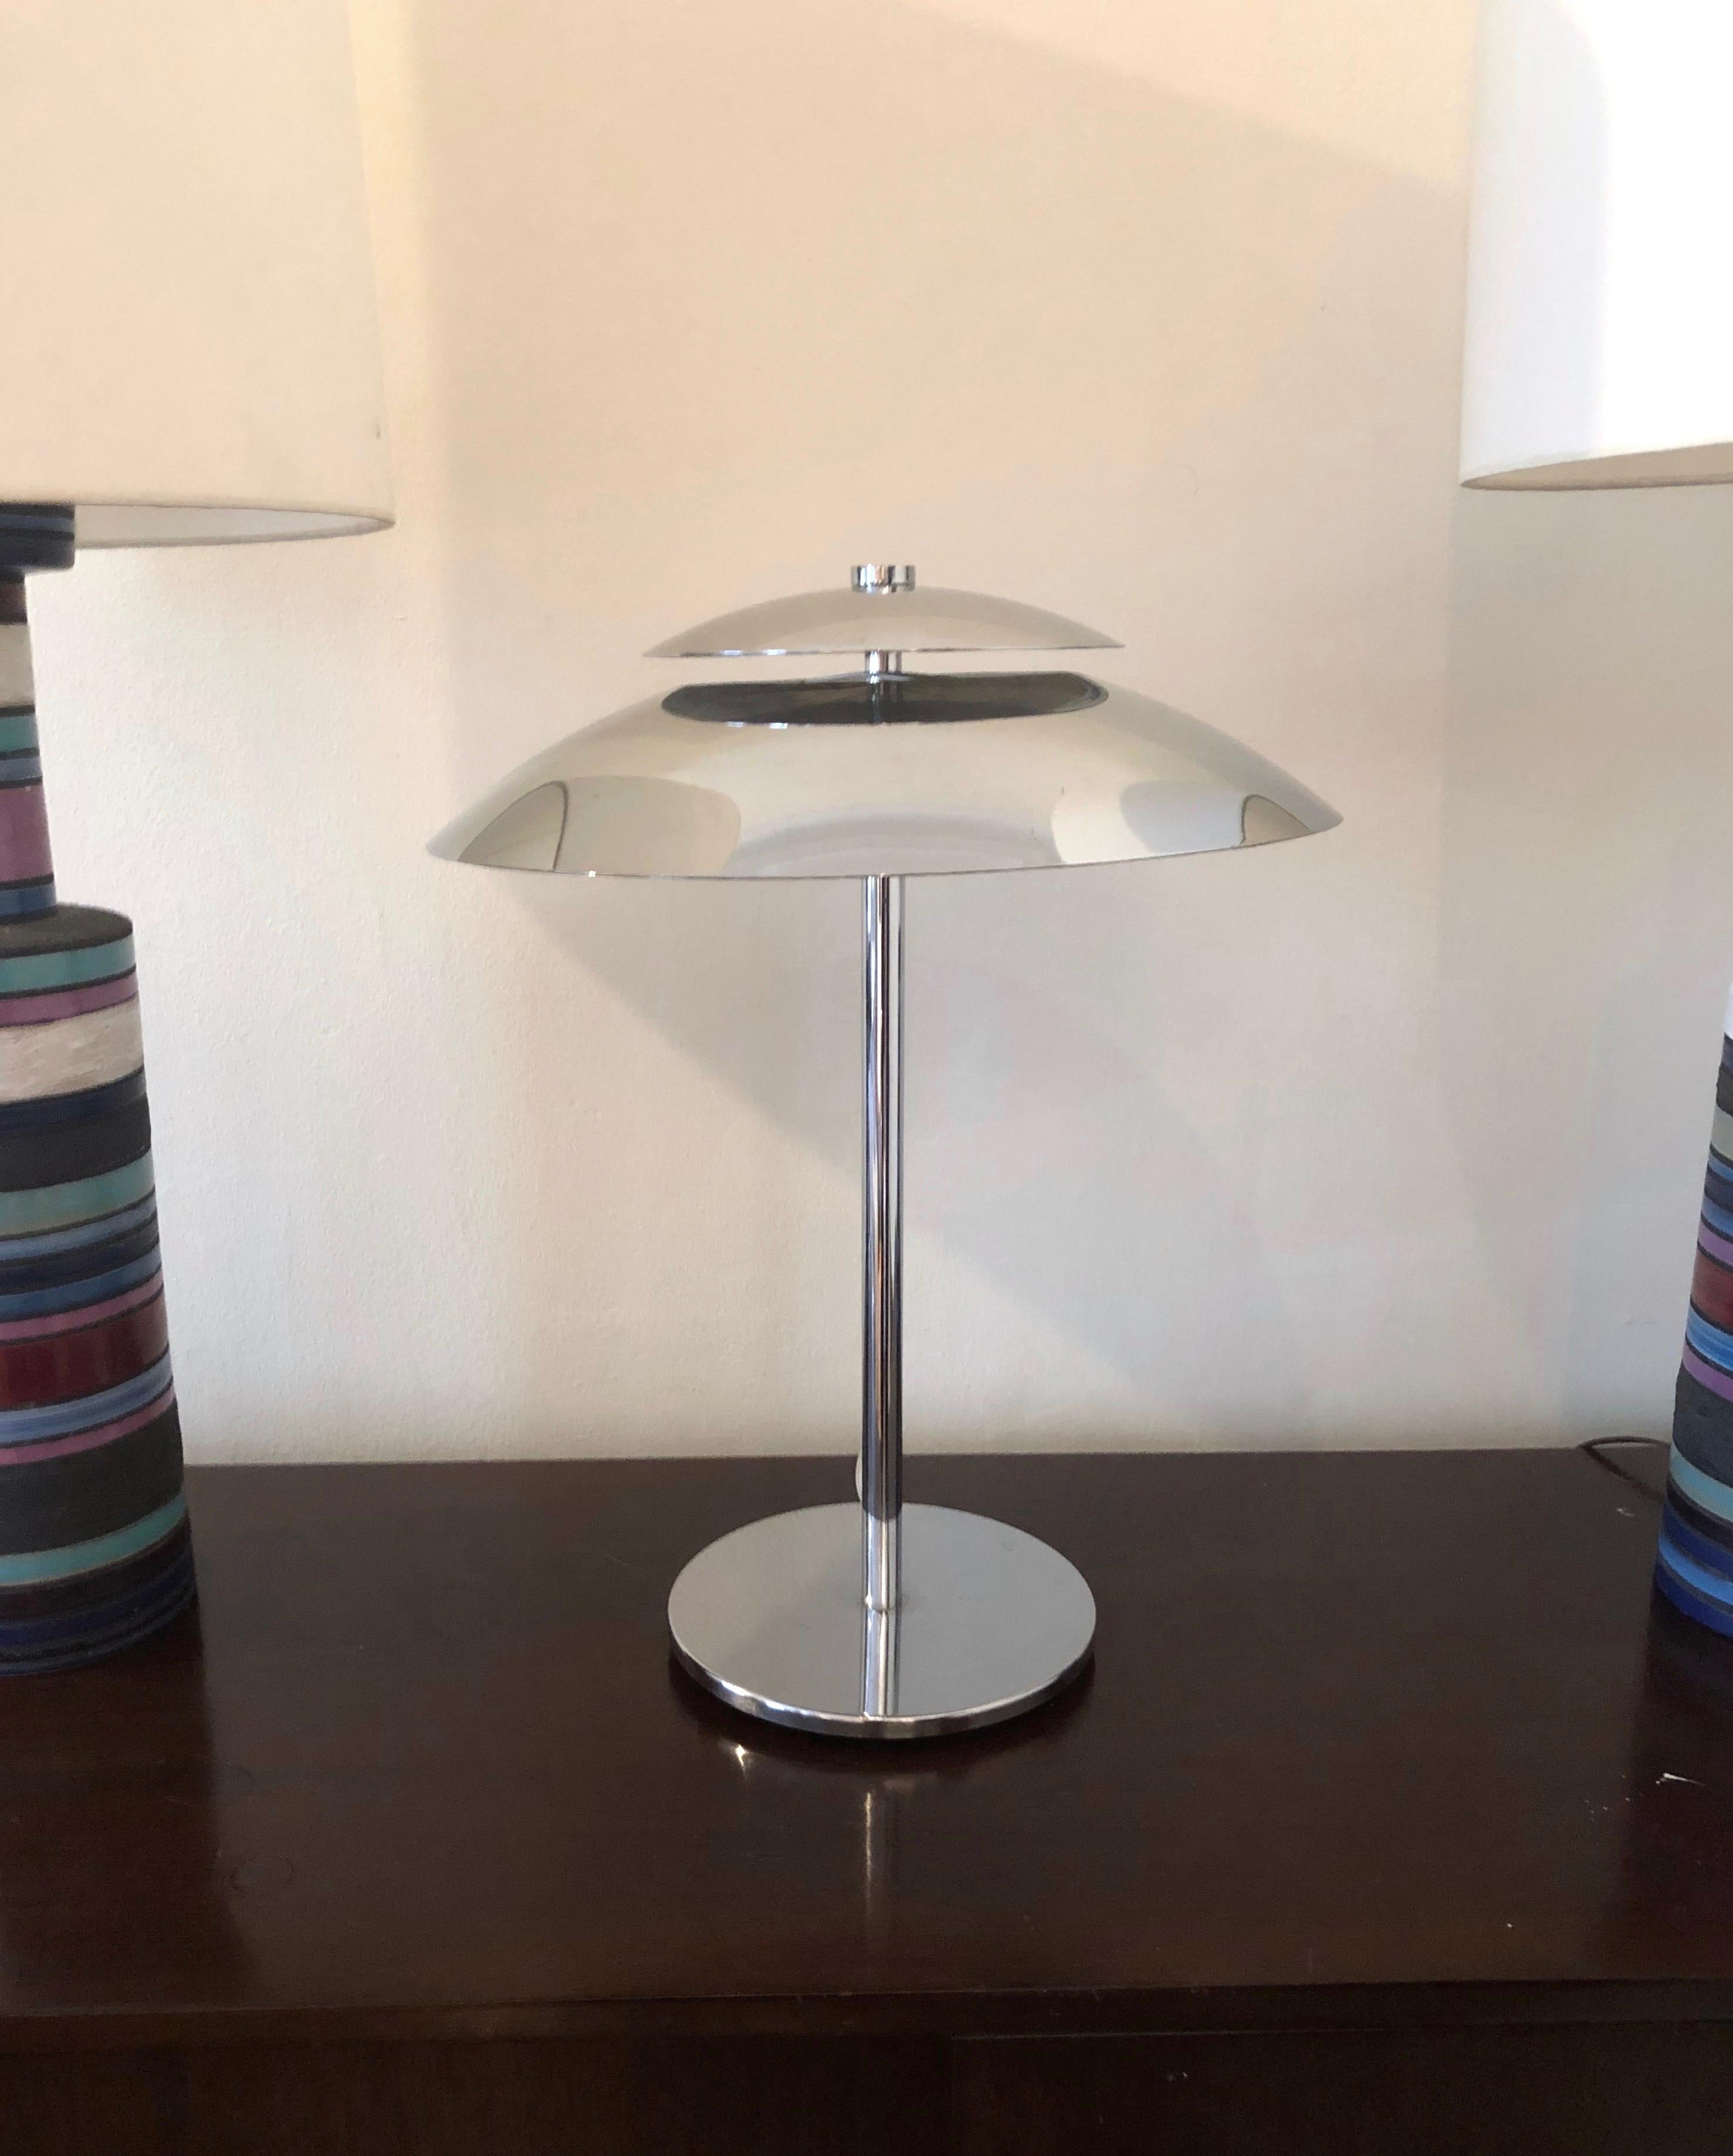 A well made, vintage modern all-chrome table lamp has a round, weighted base and cylindrical stem that hold the rounded triangular shade featuring an elevated segment. The lamp has two sockets, a flat round finial, and is made of sturdy gauge metal